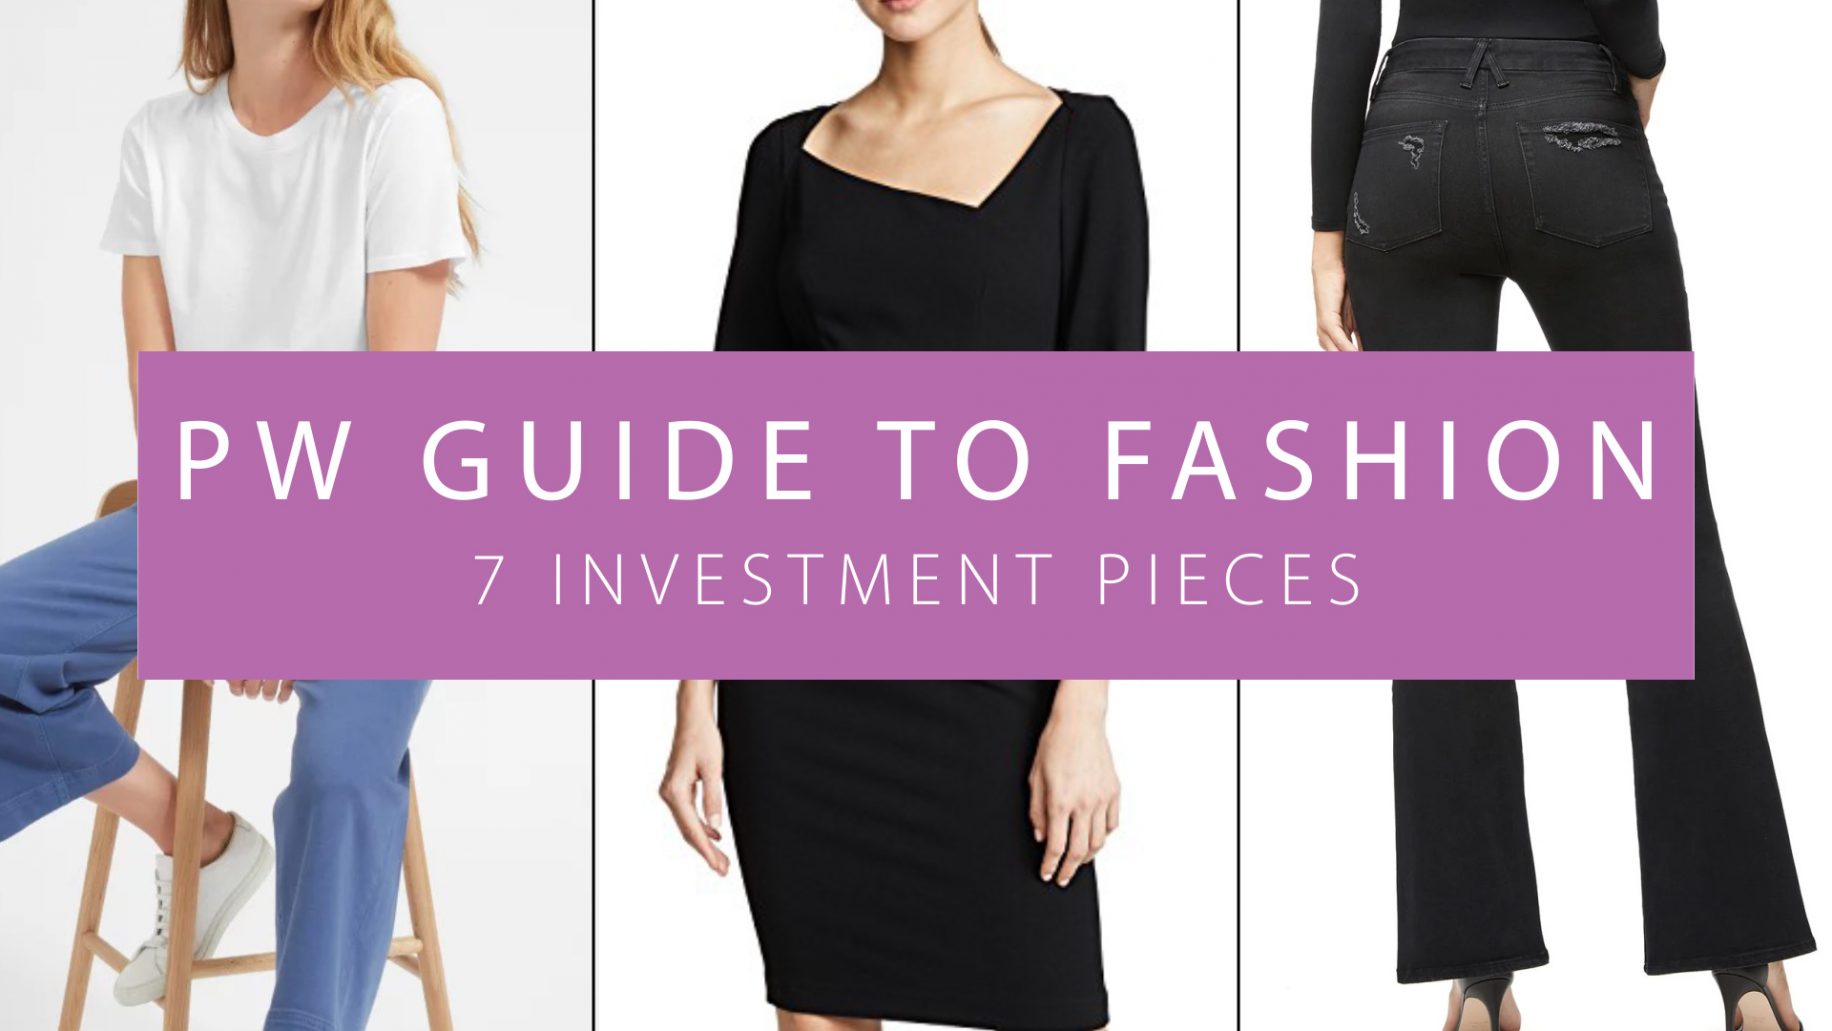 Are you investing in yourself and your style? Check out our guide to investment clothing!